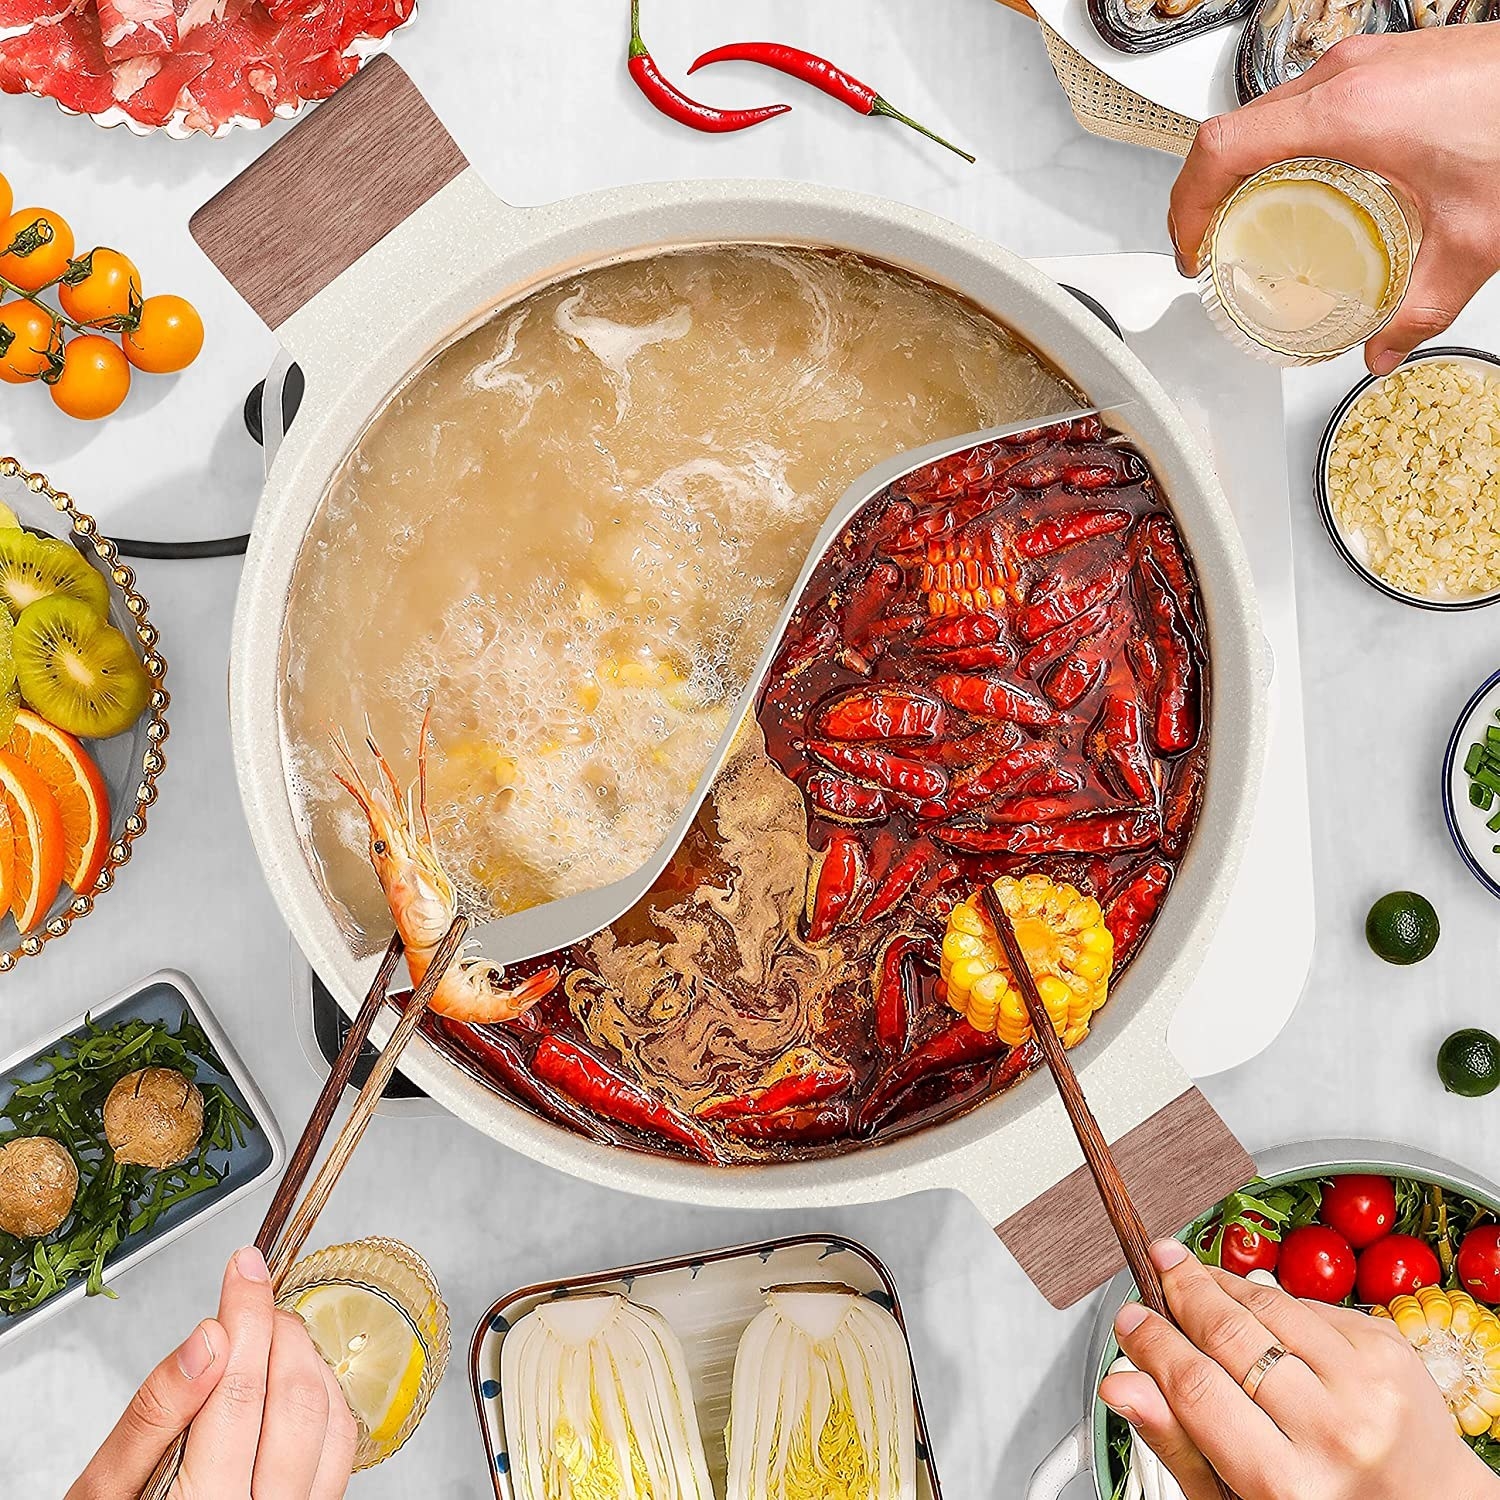 Two people dipping food into a boiling hot pot